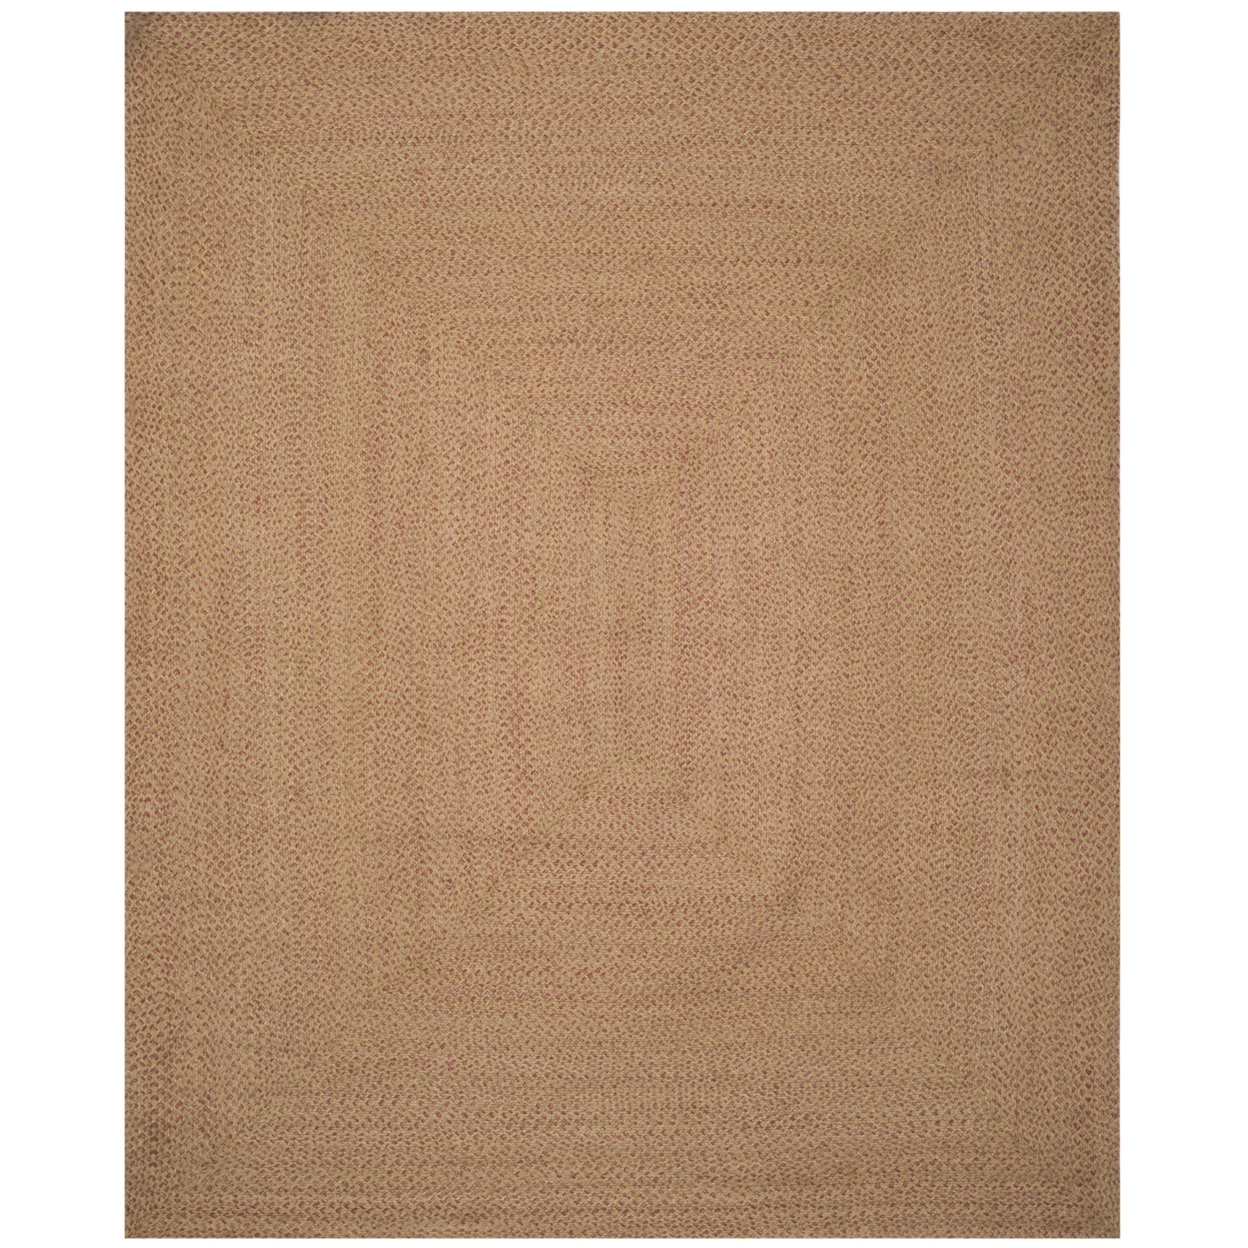 SAFAVIEH Braided Collection BRD164A Handwoven Multi Rug - 8' X 10'